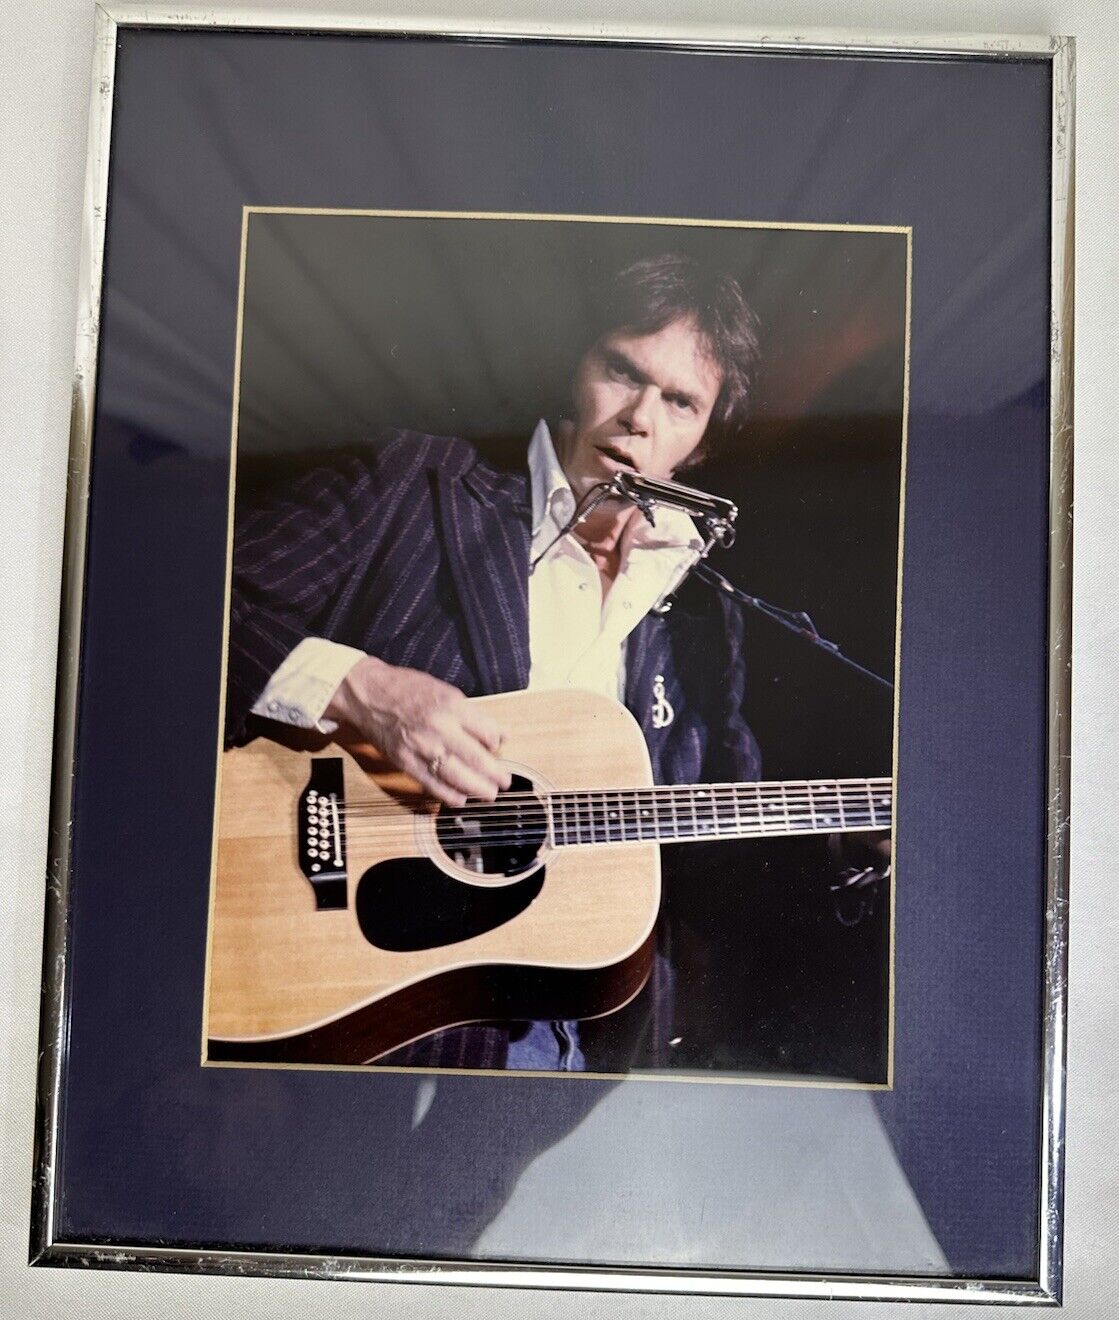 Neil Young With Guitar And Harmonica Framed Original Photograph Vintage 8x10